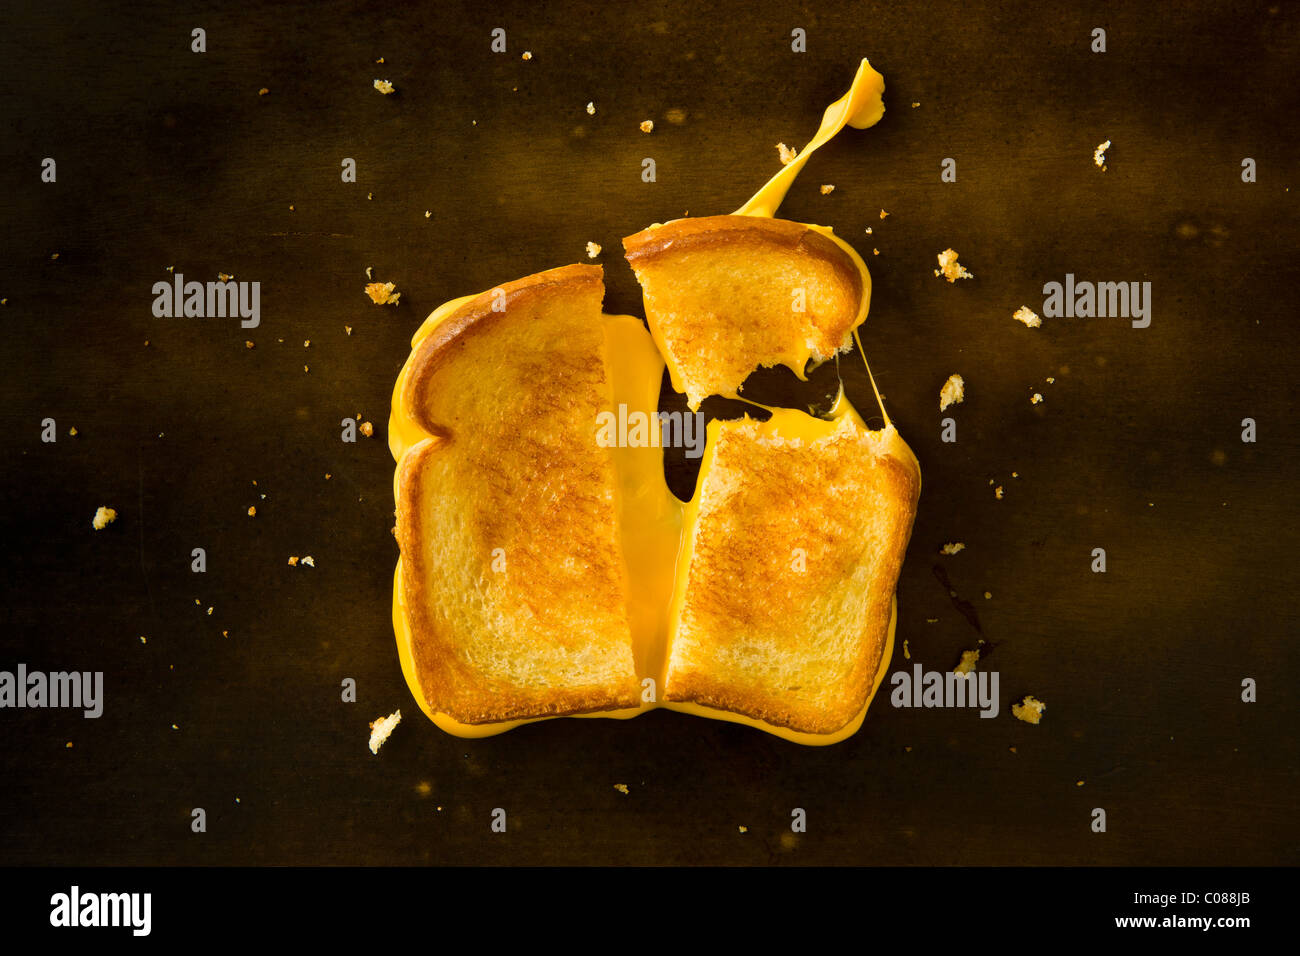 A Grilled Cheese Sandwich cut in half and with the top right corner broken off pulling the cheese on a wood table Stock Photo